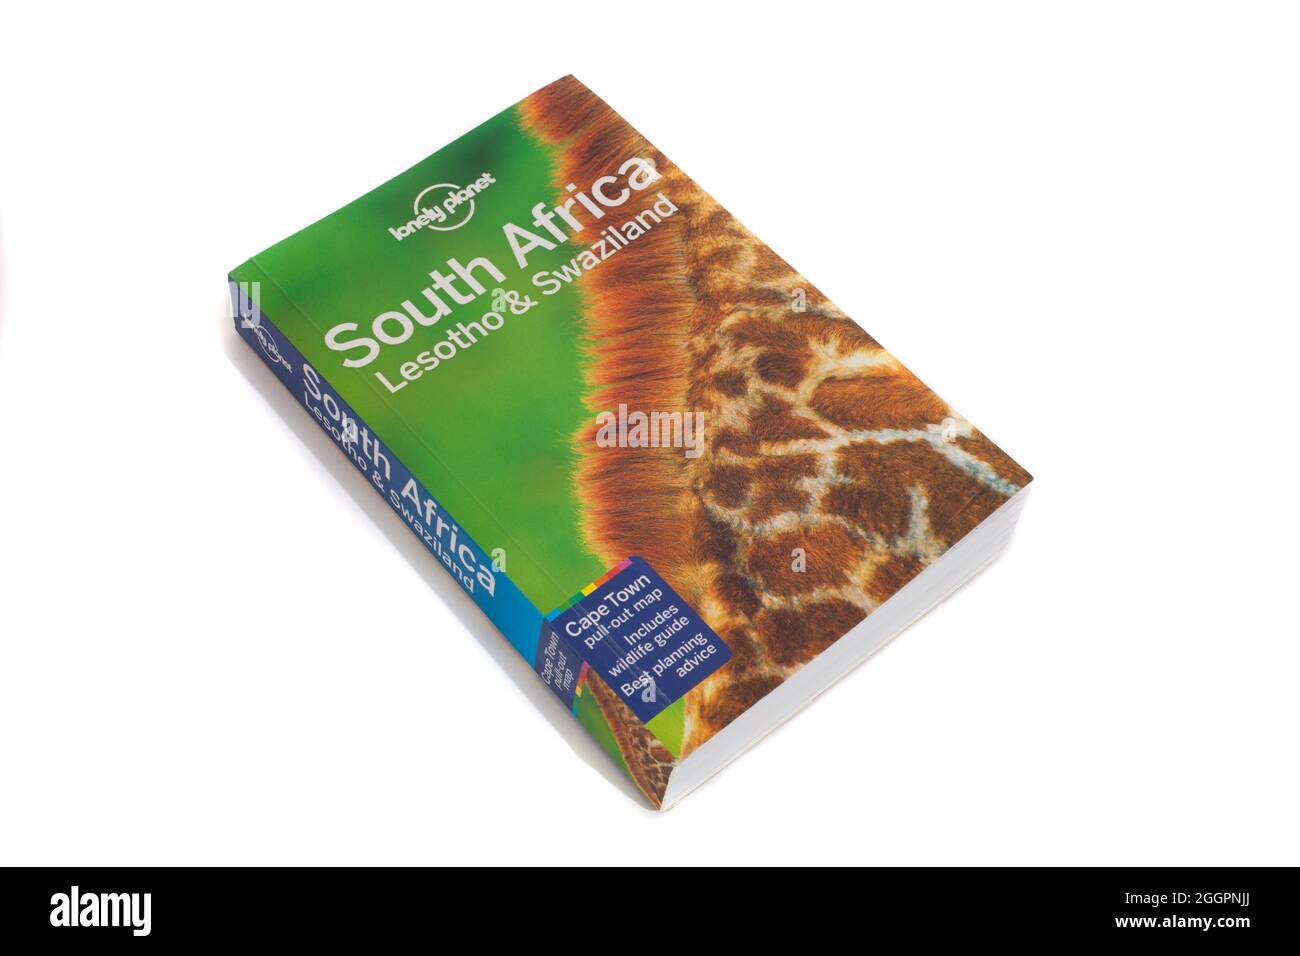 Das Buch Lonely Planet, South Africa Lesotho and Swasiland Stockfoto